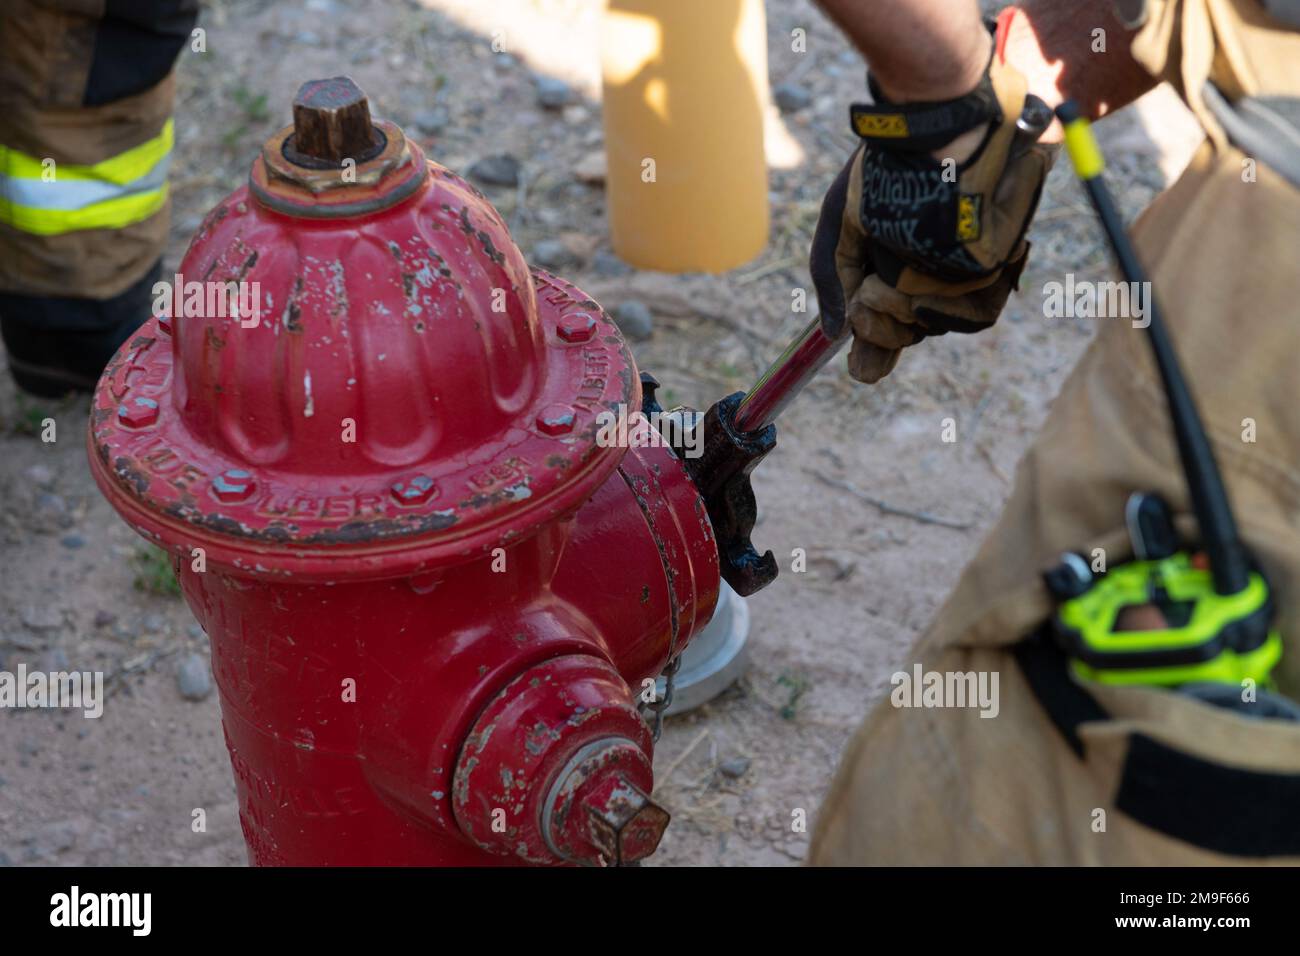 https://c8.alamy.com/comp/2M9F666/an-airman-from-the-49th-civil-engineer-squadron-secures-a-fire-hydrant-during-an-emergency-response-training-exercise-may-19-2022-on-holloman-air-force-base-new-mexico-in-order-to-connect-a-fire-hose-to-a-fire-hydrant-the-airman-must-remove-the-outlet-of-it-to-connect-a-fire-hose-adapter-2M9F666.jpg